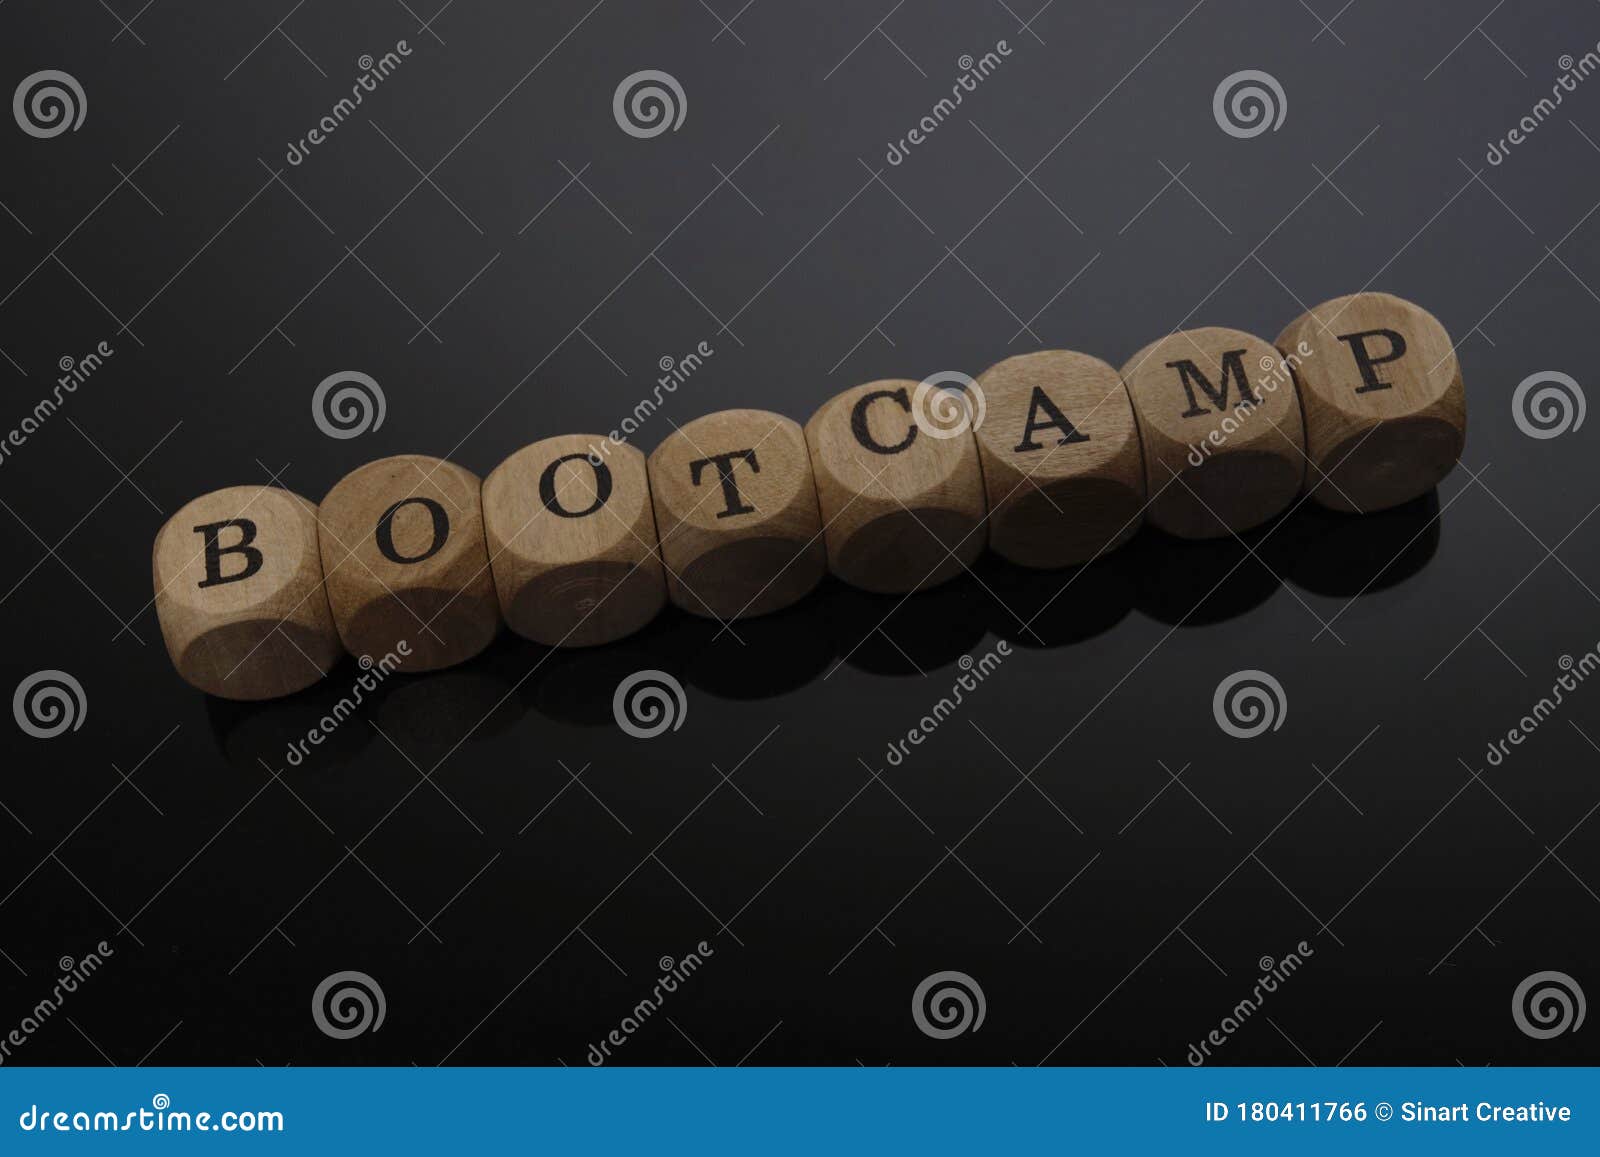 boot camp word cube with reflection background